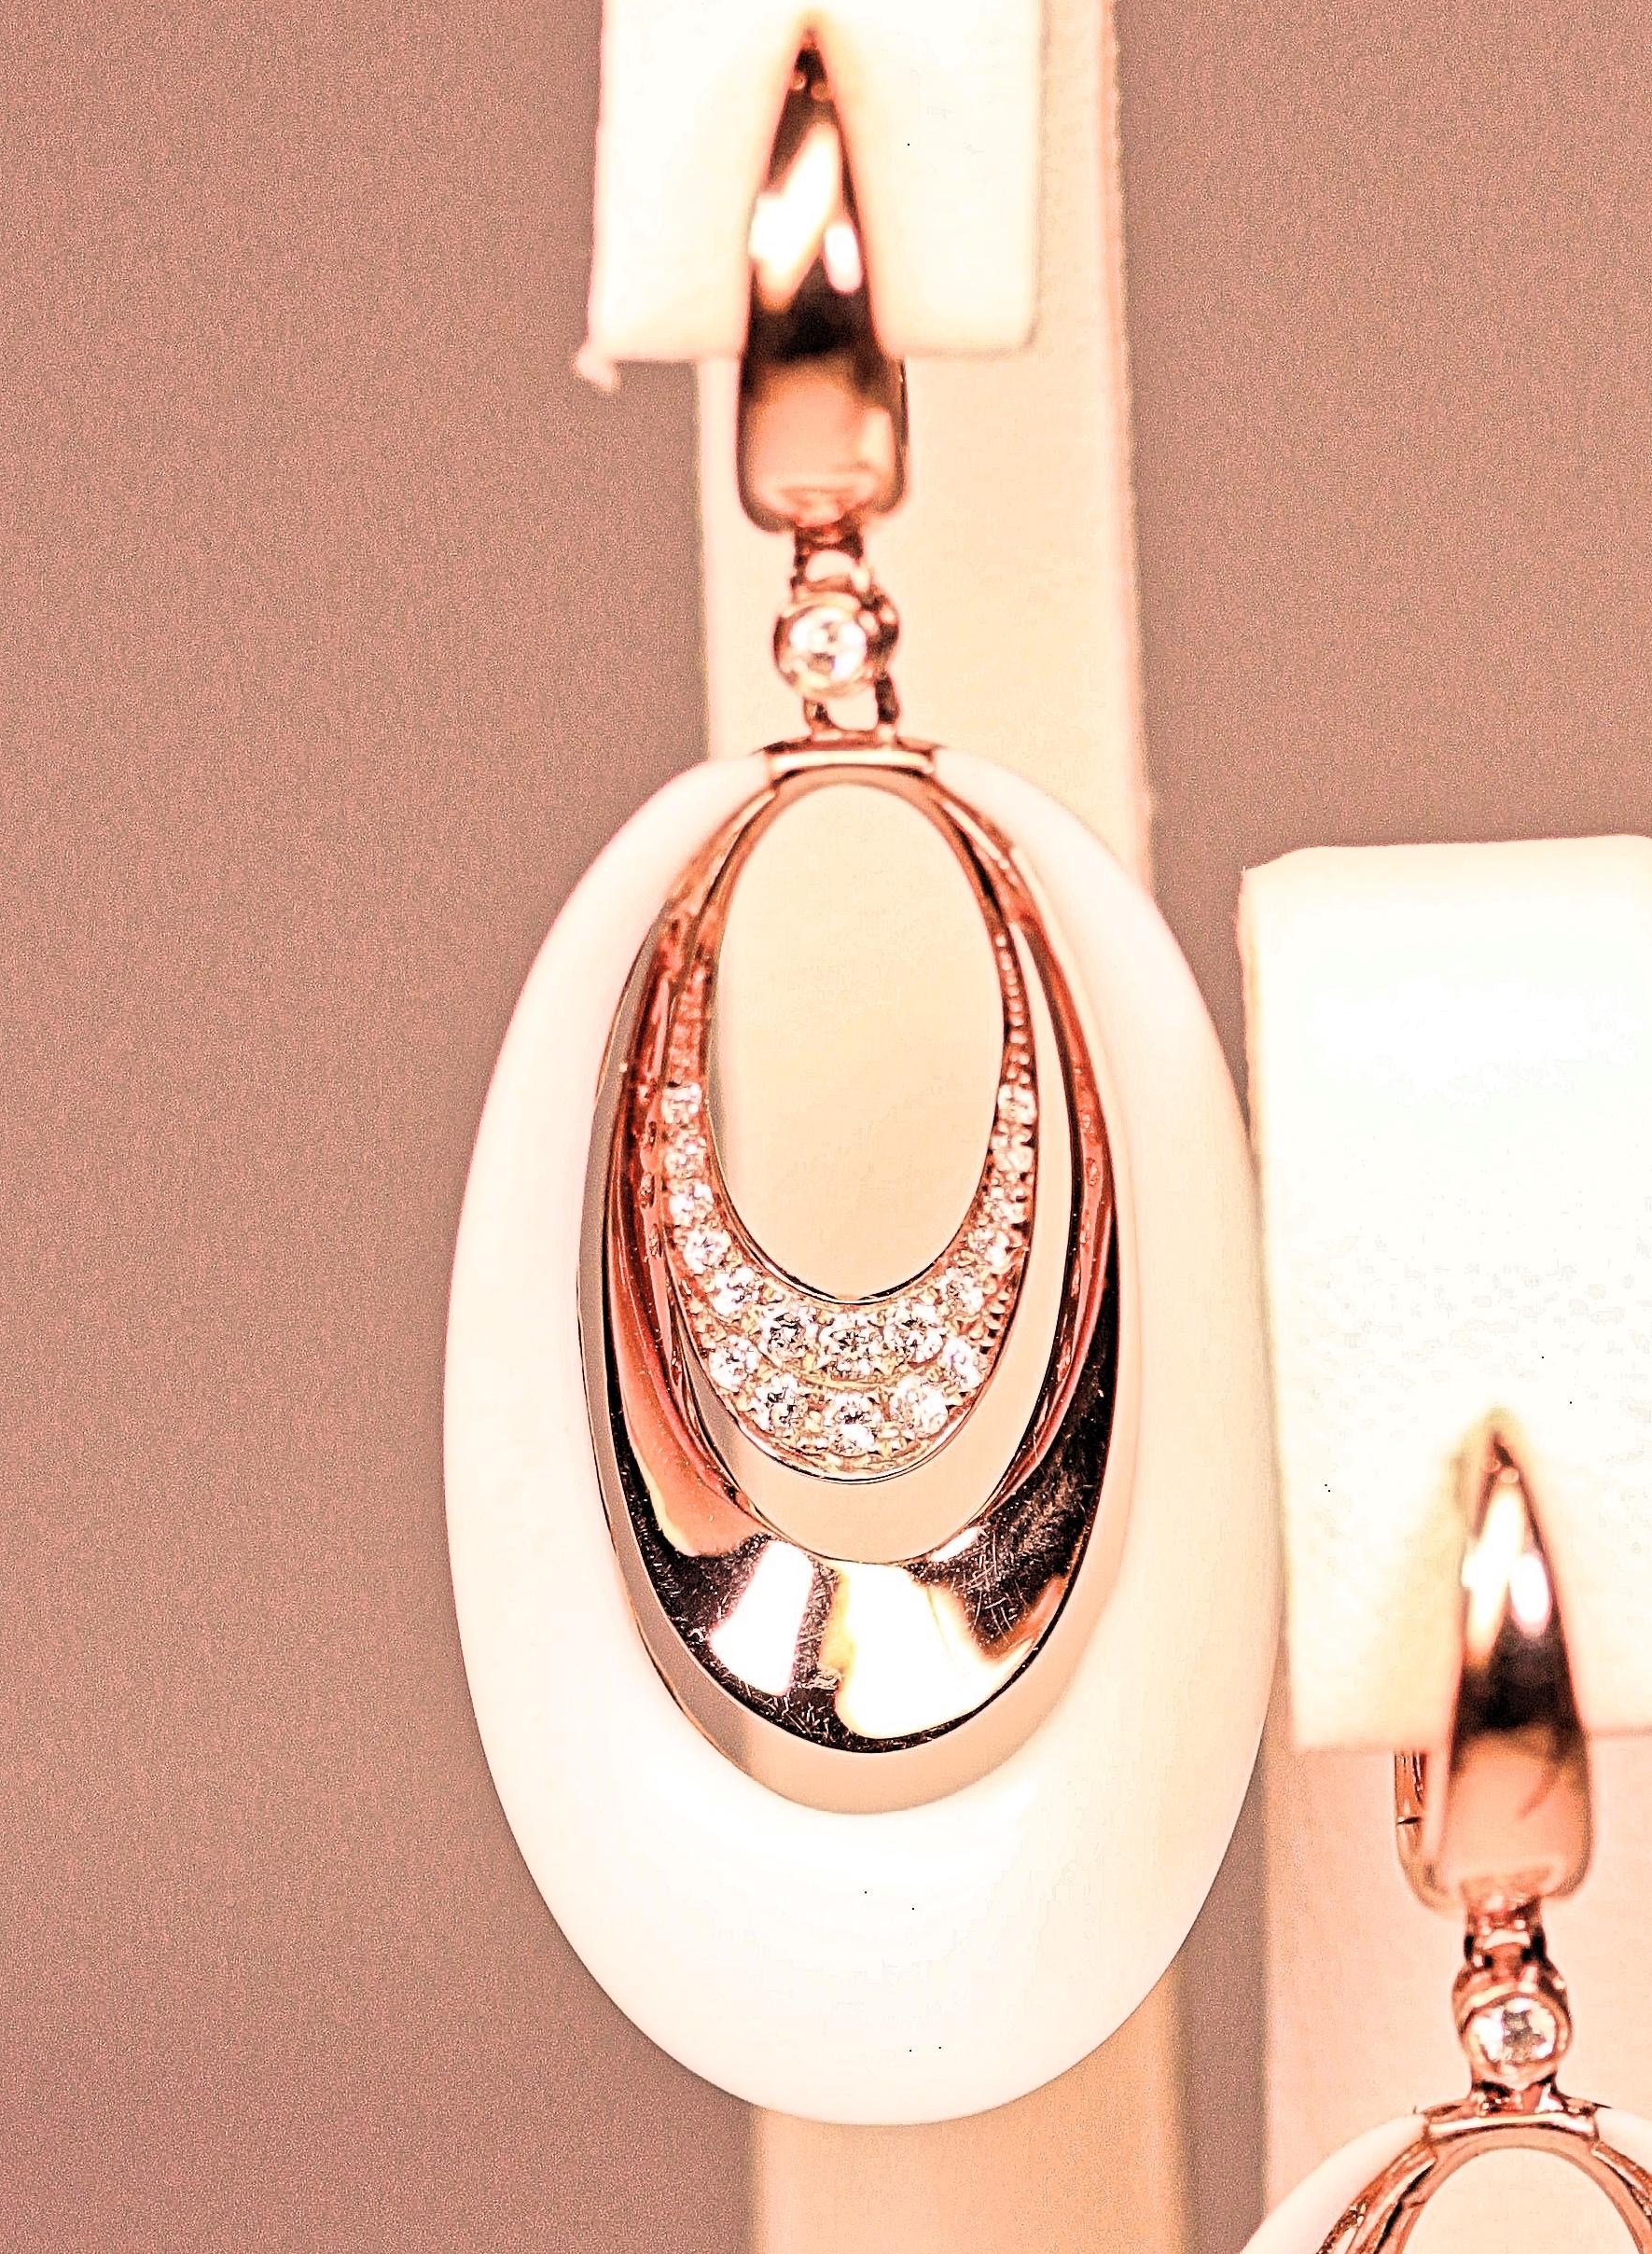 The earrings are 14 karat rose gold with white agate and diamonds.  The earrings are long dangles with oval circles of white agate, rose gold and diamonds. Beautiful summer earrings with .33 carat total weight of small round brilliant cut diamonds.